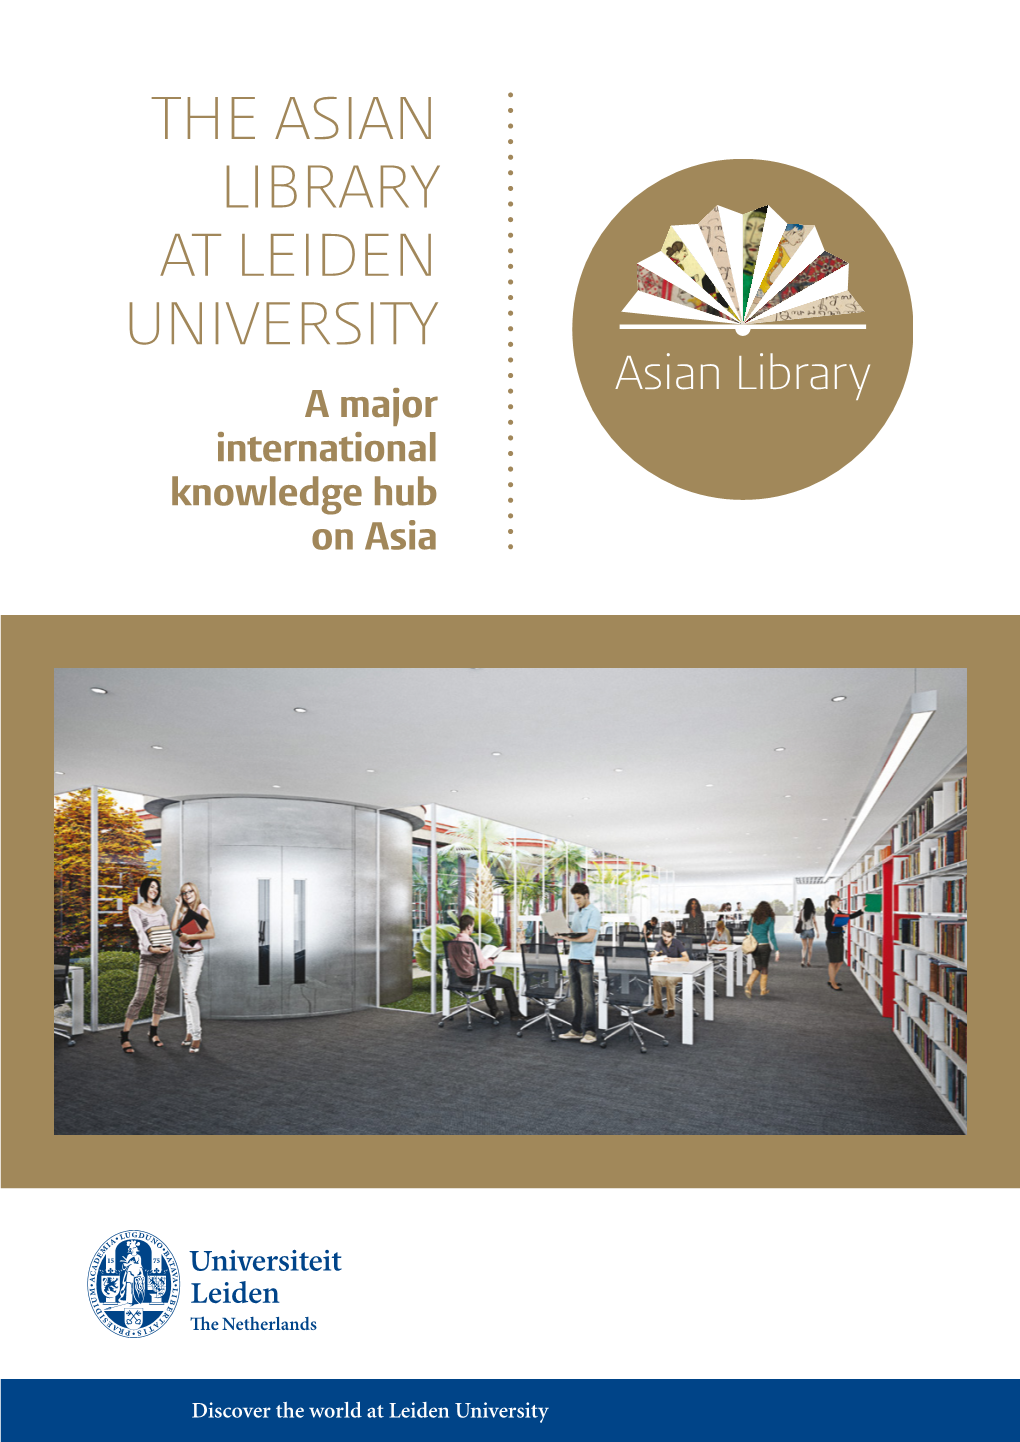 THE ASIAN LIBRARY at LEIDEN UNIVERSITY a Major International Knowledge Hub on Asia